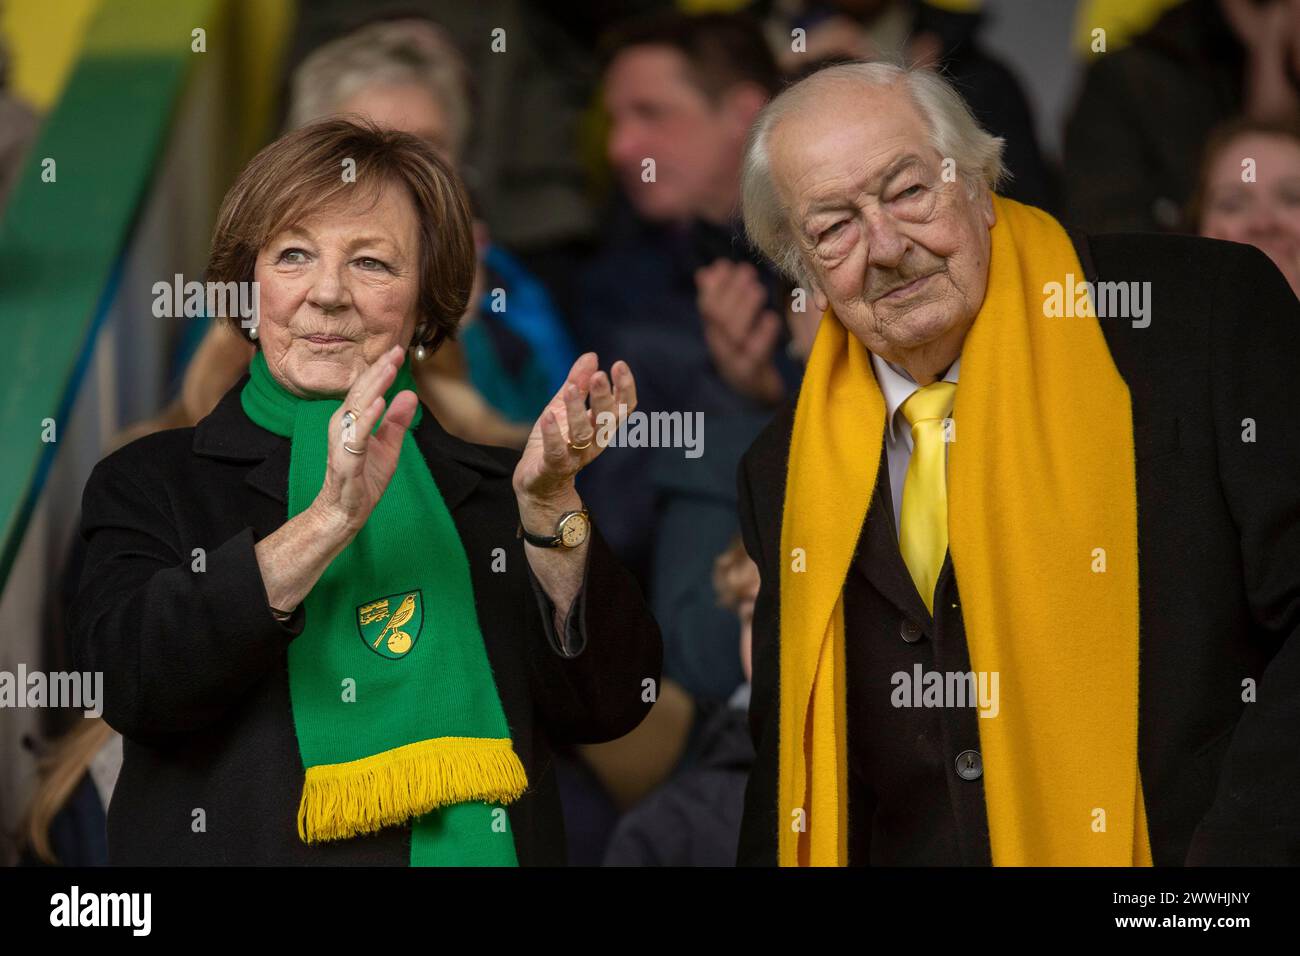 Norwich on Sunday 24th March 2024. Delia Smith and Michael Wynn-Jones, owners of Norwich City FC is seen in the stands during the FA Women's National League Division One match between Norwich City Women and Queens Park Rangers at Carrow Road, Norwich on Sunday 24th March 2024. (Photo: David Watts | MI News) Credit: MI News & Sport /Alamy Live News Stock Photo